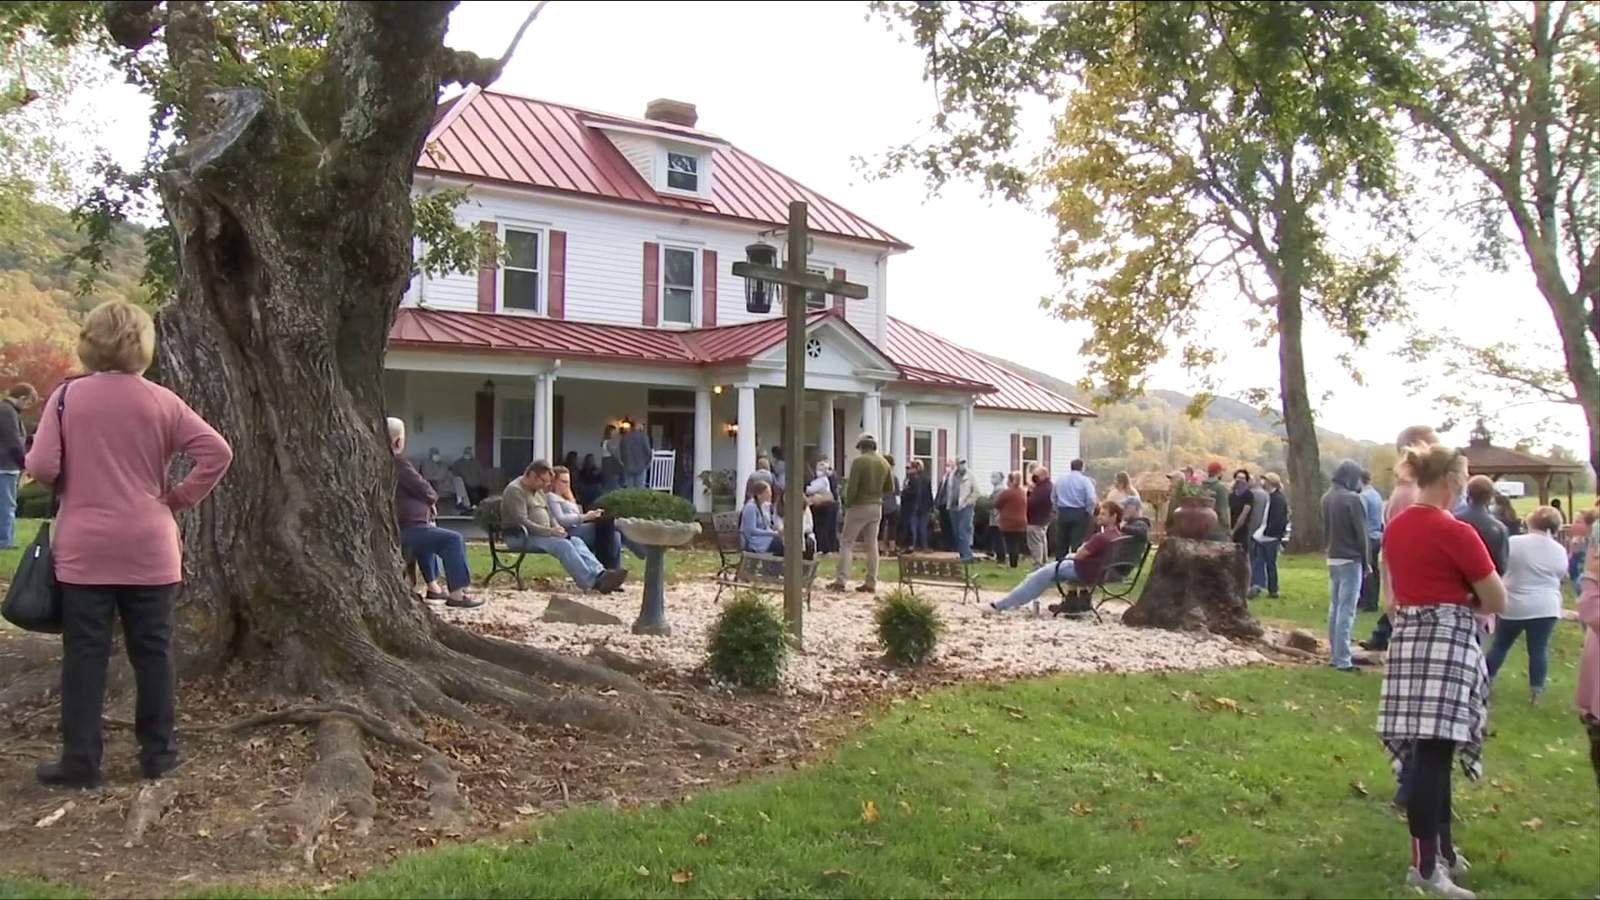 The Homeplace inundated with customers since closure announcement, but is it enough to keep it open?